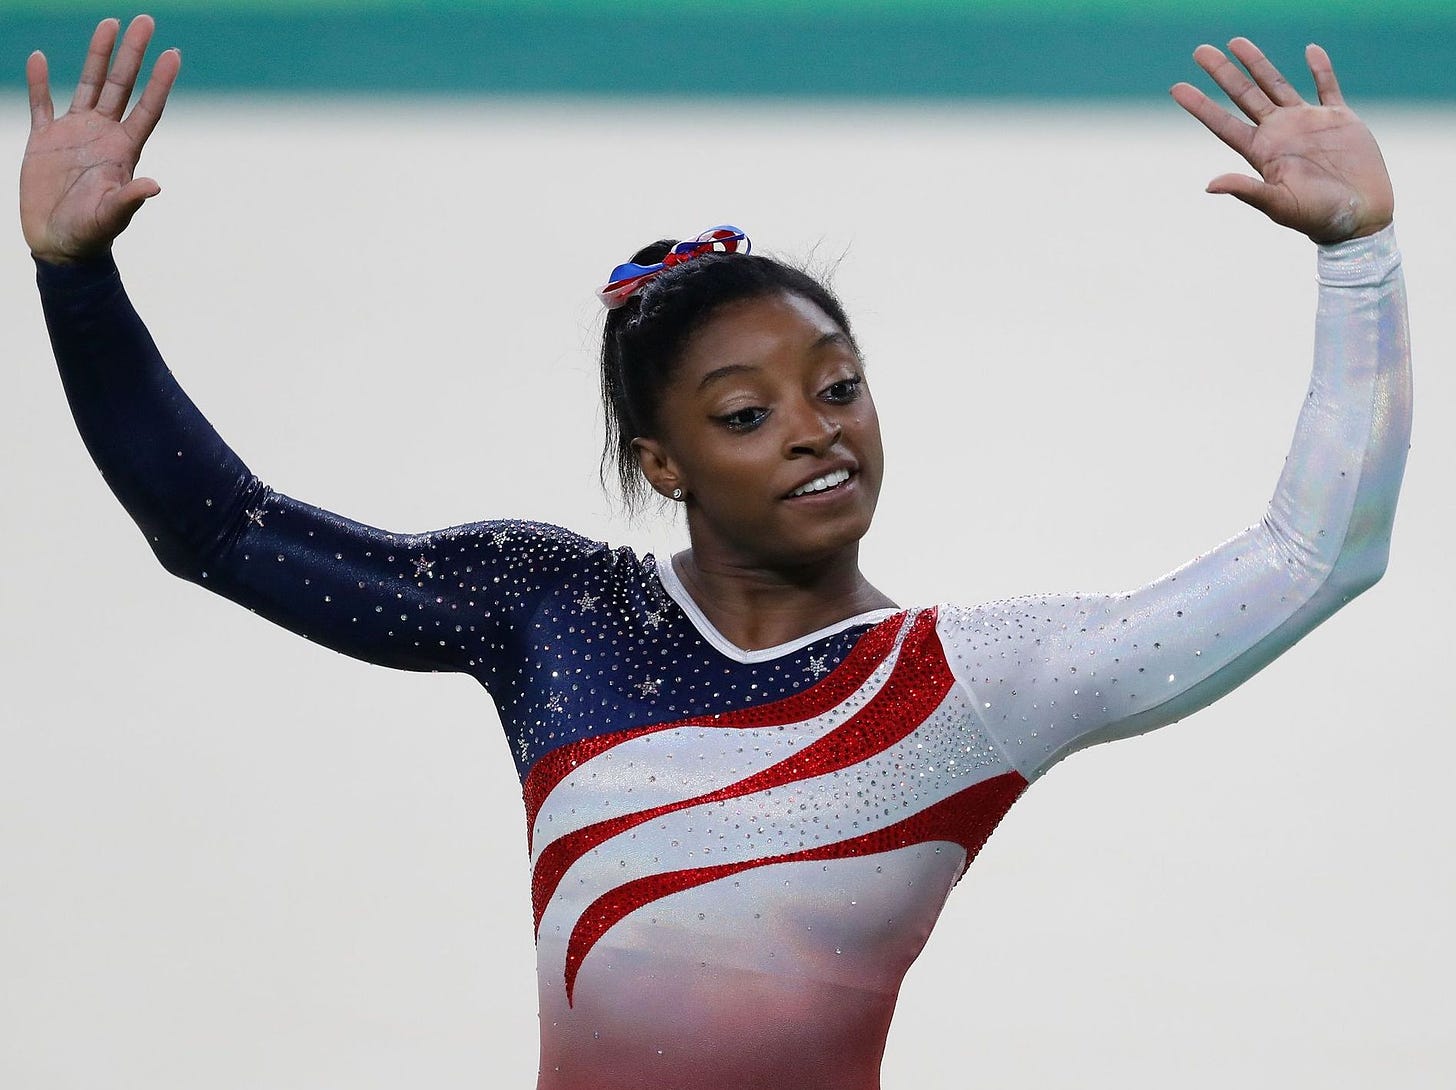 Simone Biles in a leotard during the 2016 Olympics